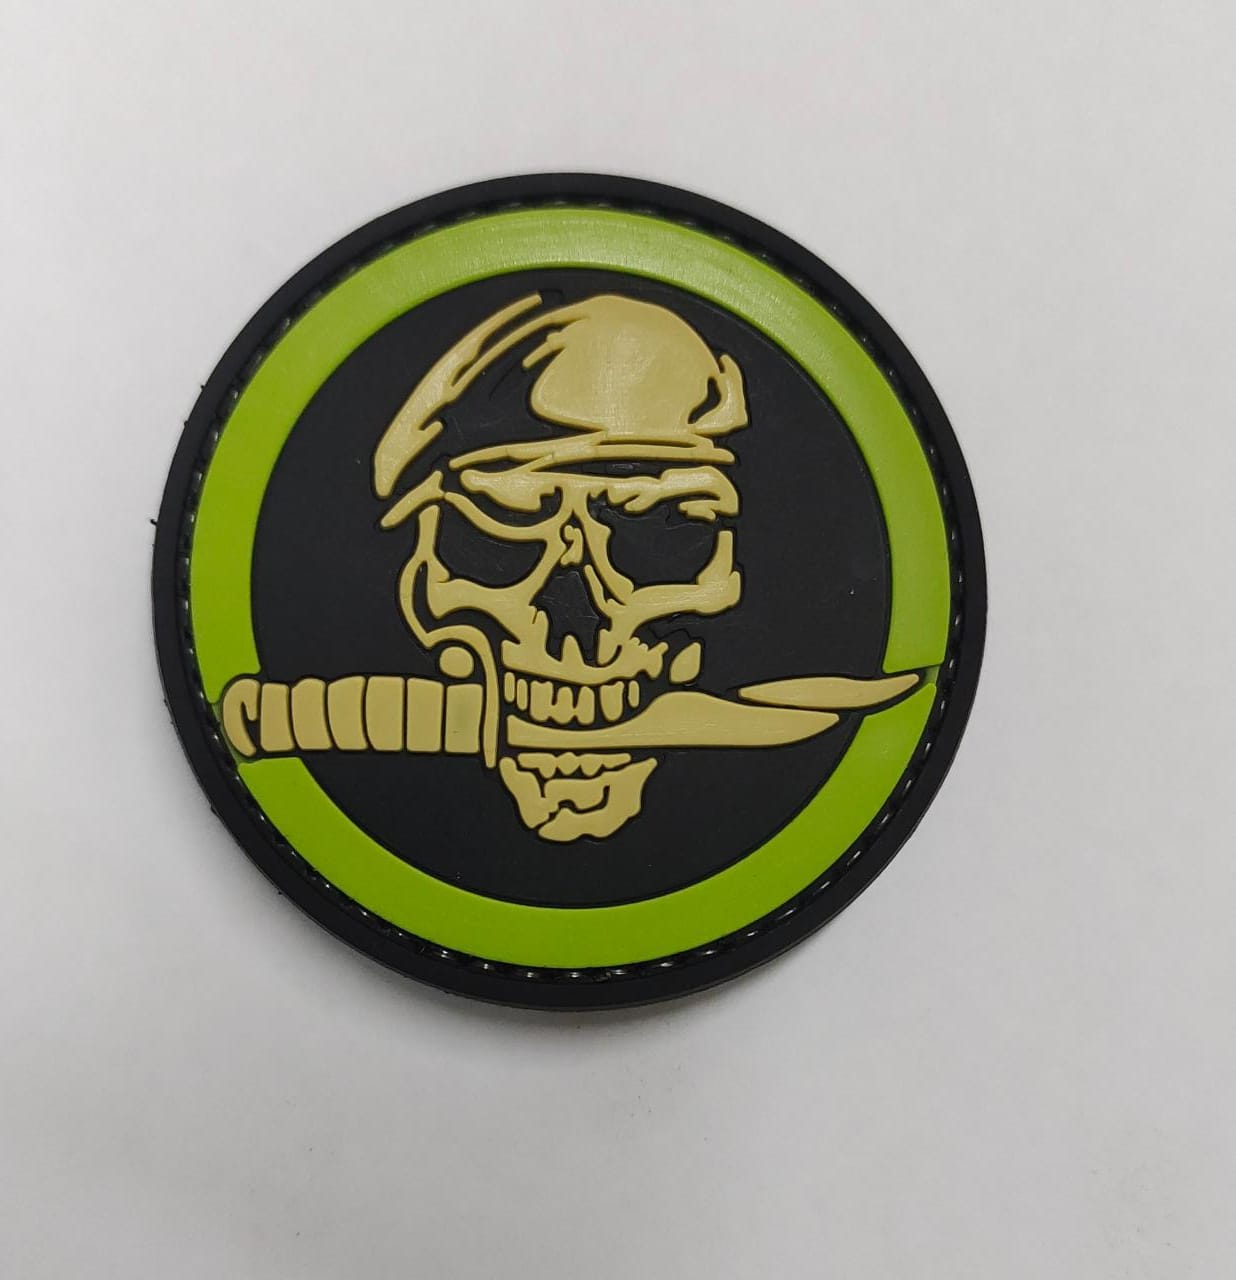 Missions - Skull & Knife Patch